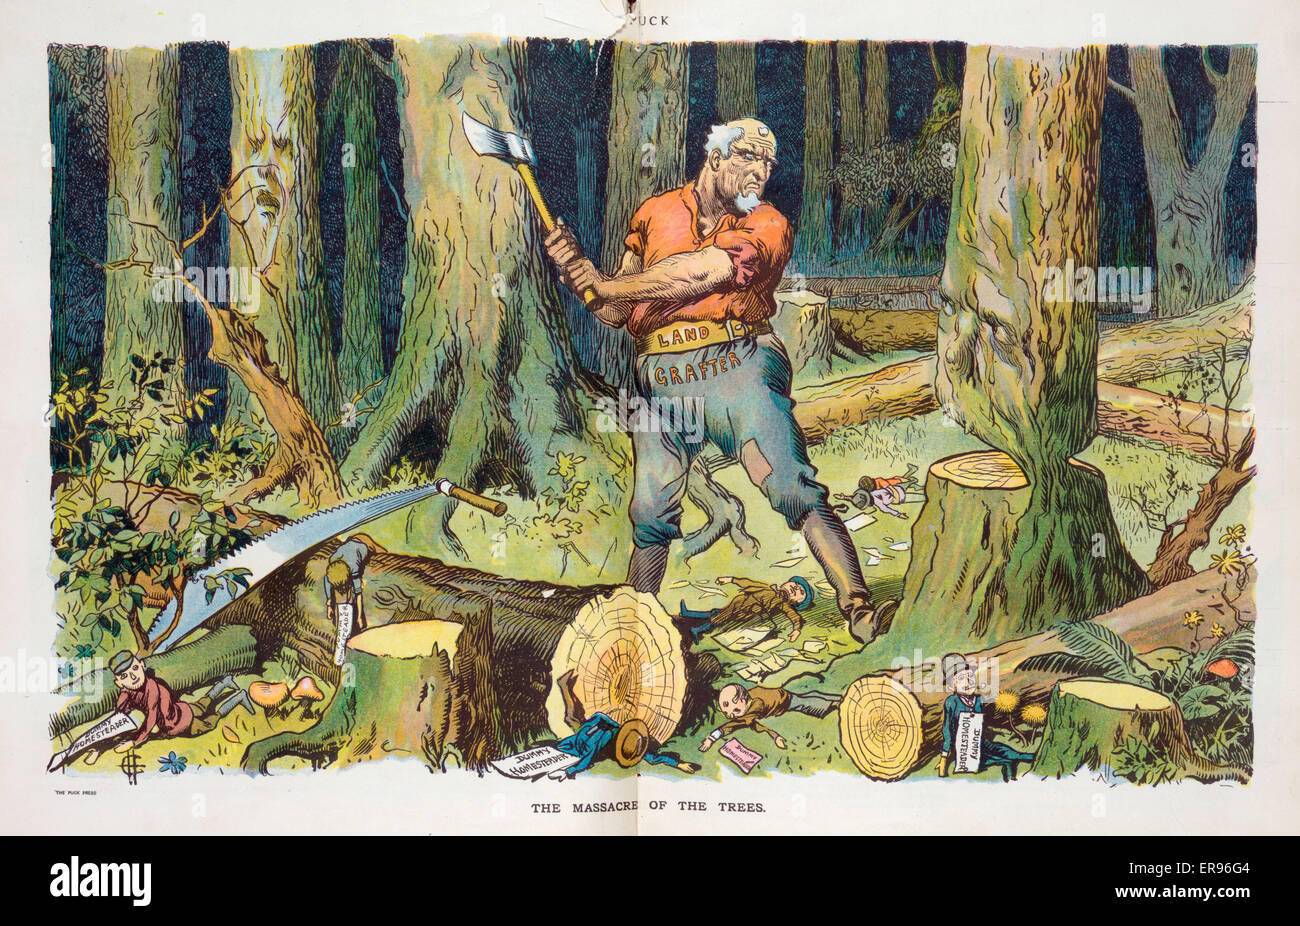 The massacre of the trees. Illustration shows a man labeled Land Grafter chopping down a tree in a forest where other trees have been cut down; scattered on the ground are doll-like figures labeled Dummy Homesteader. Date 1907 April 3. The massacre of the Stock Photo